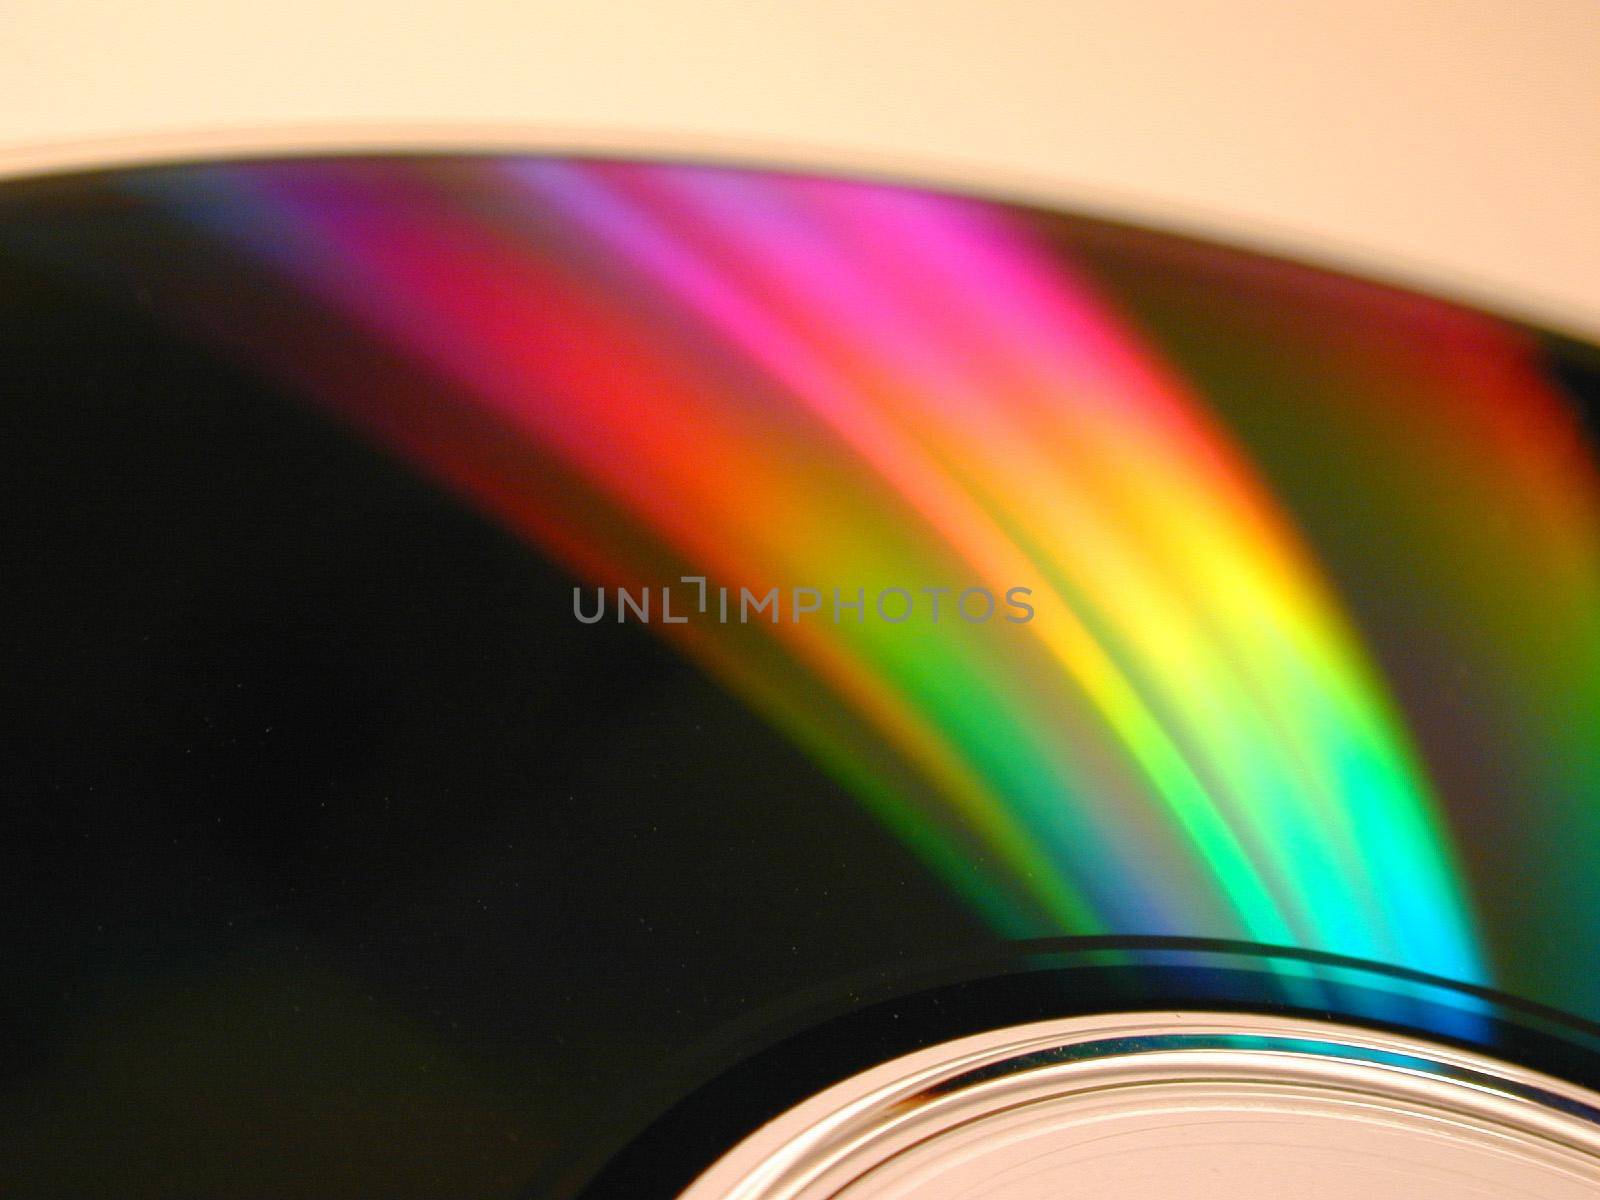 Spectrum rainbow light reflection on CD or DVD optical disc radial surface, as digital object beauty background concept